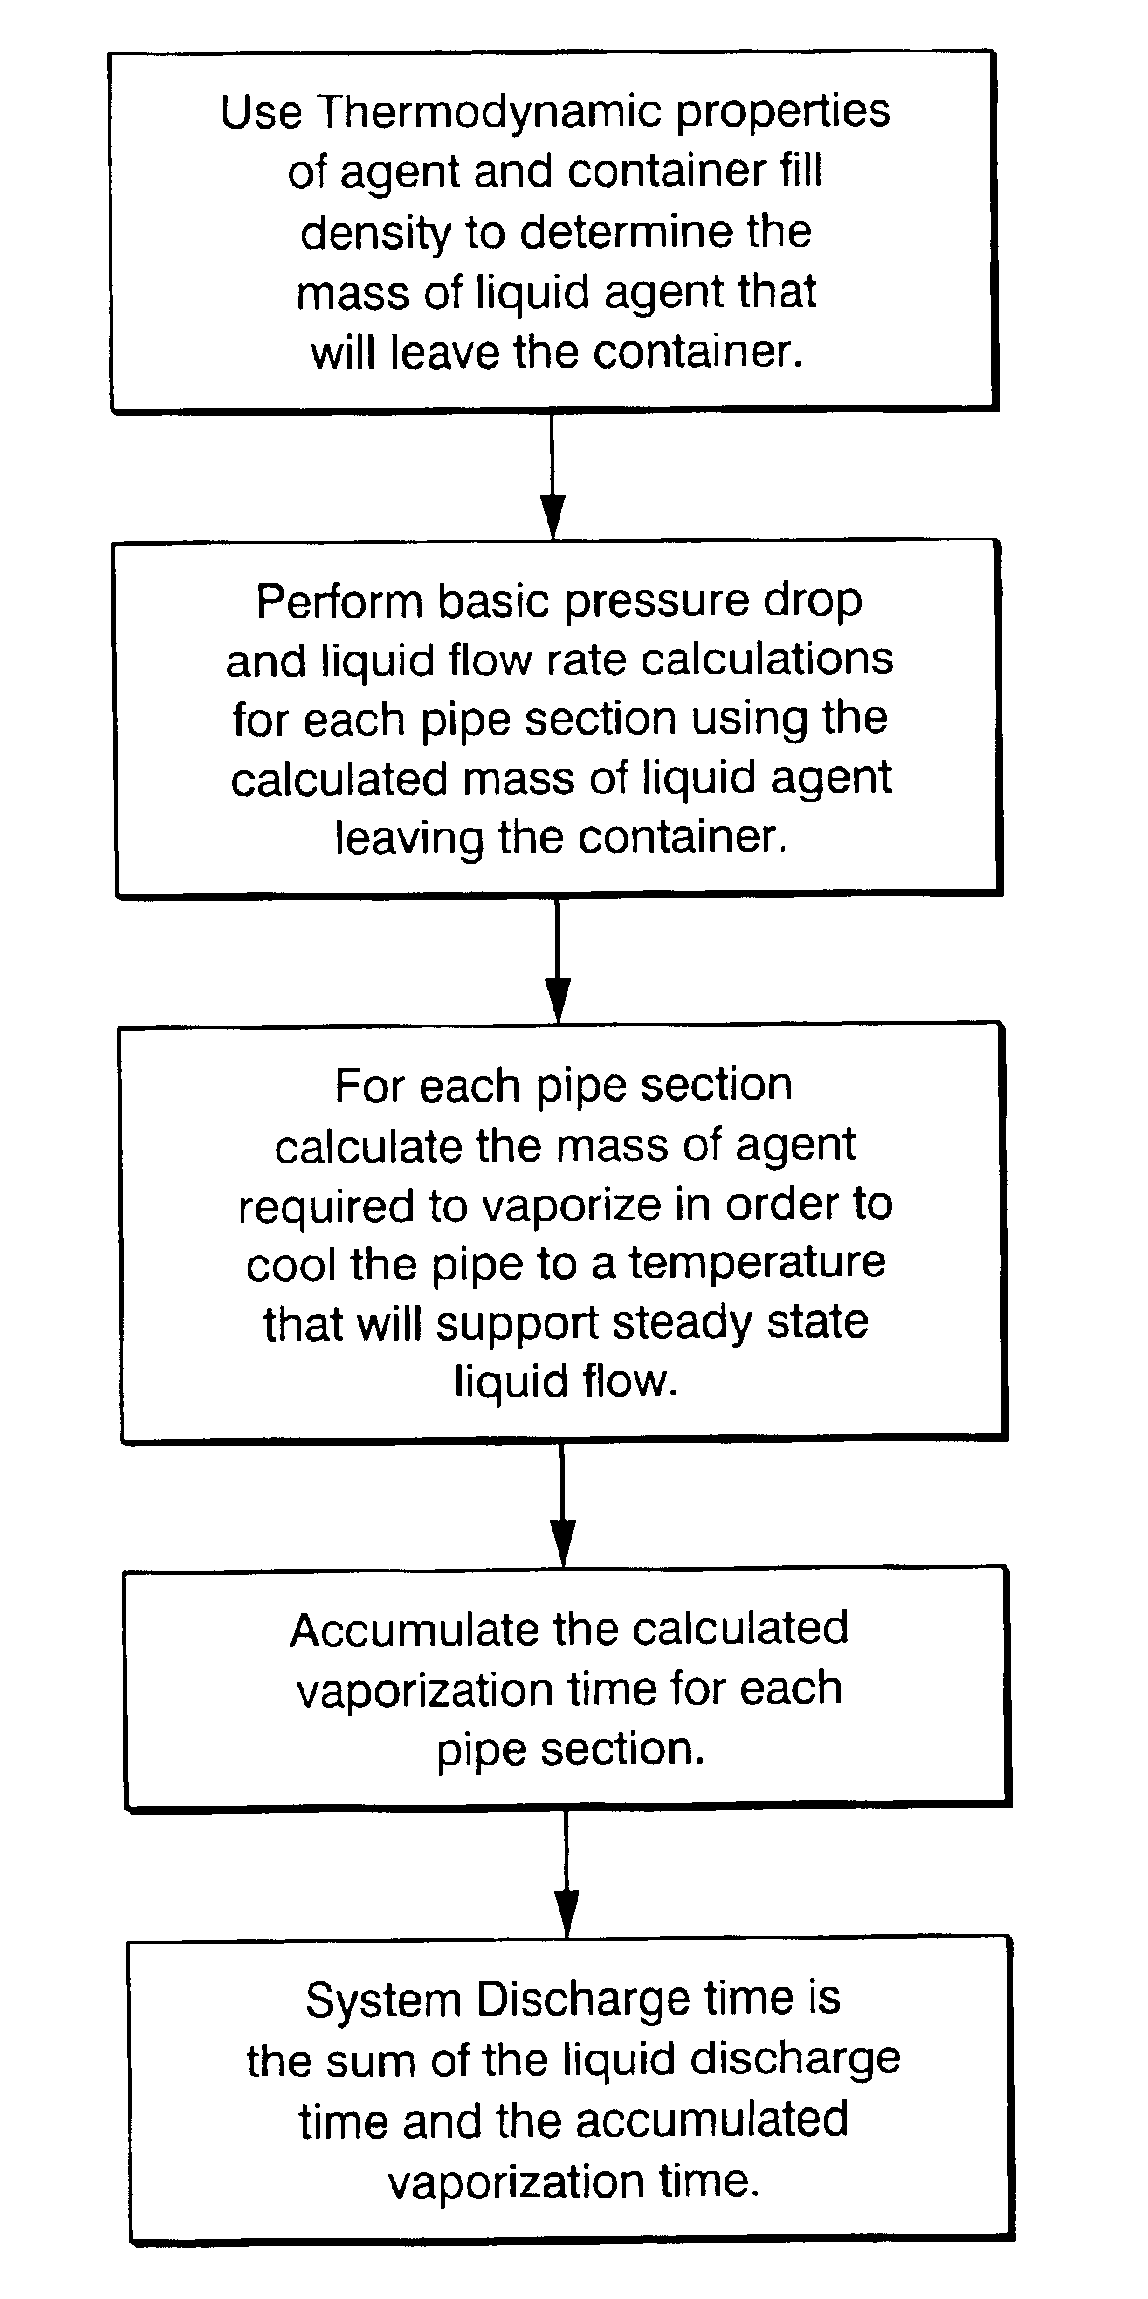 Retrofitted non-Halon fire suppression system and method of retrofitting existing Halon based systems